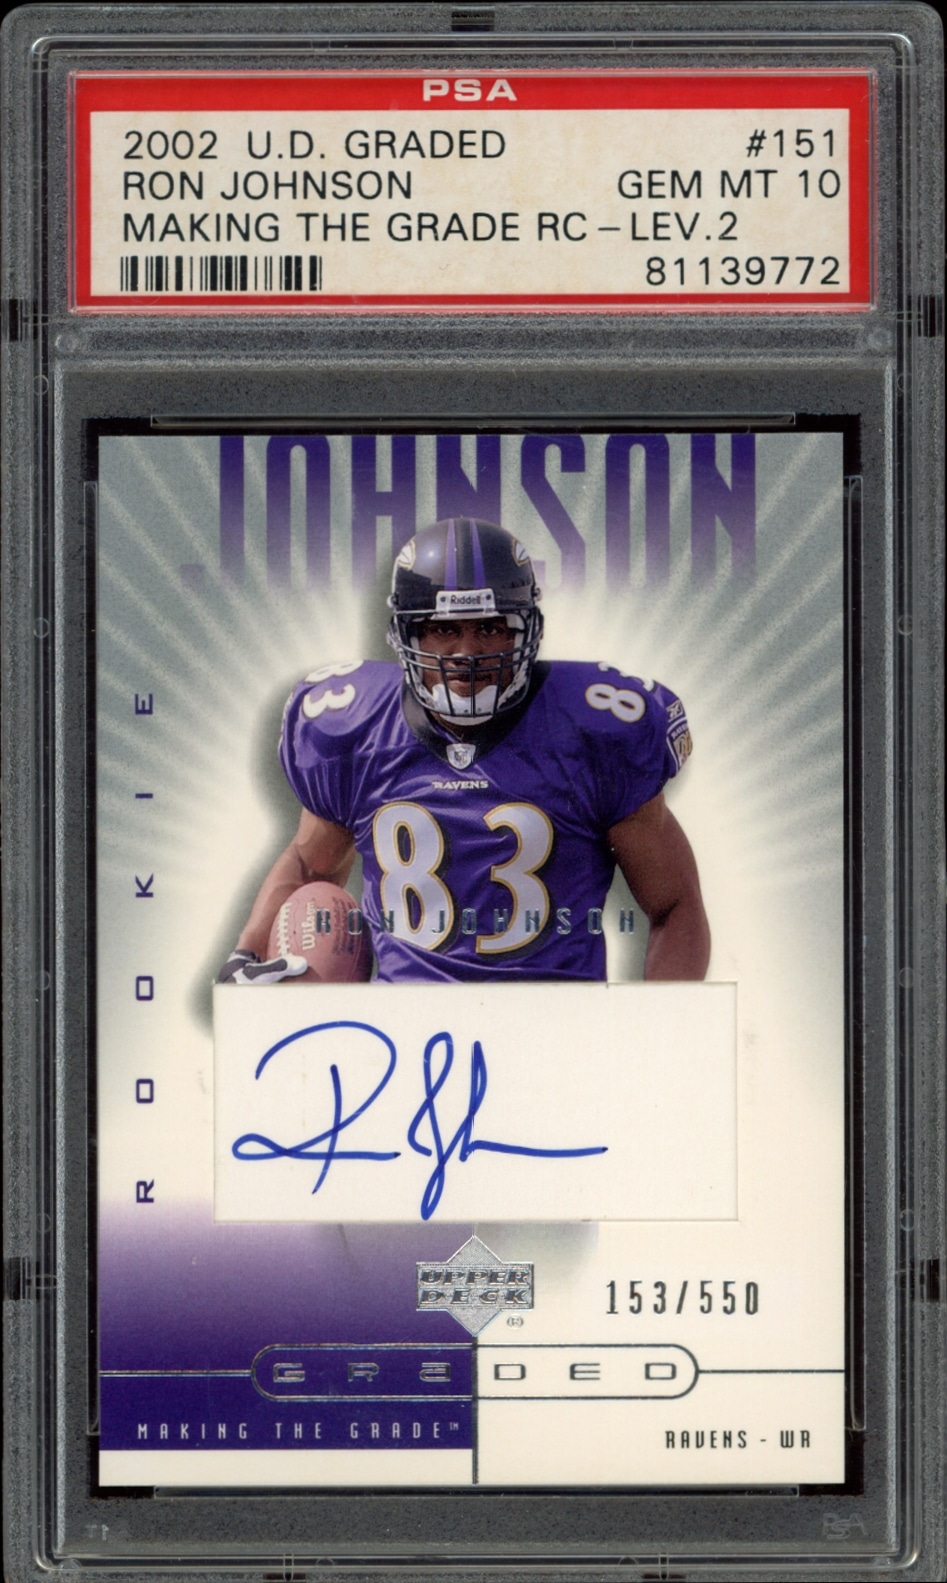 PSA 10-rated 2002 Upper Deck card featuring football player Ron Johnson in action.